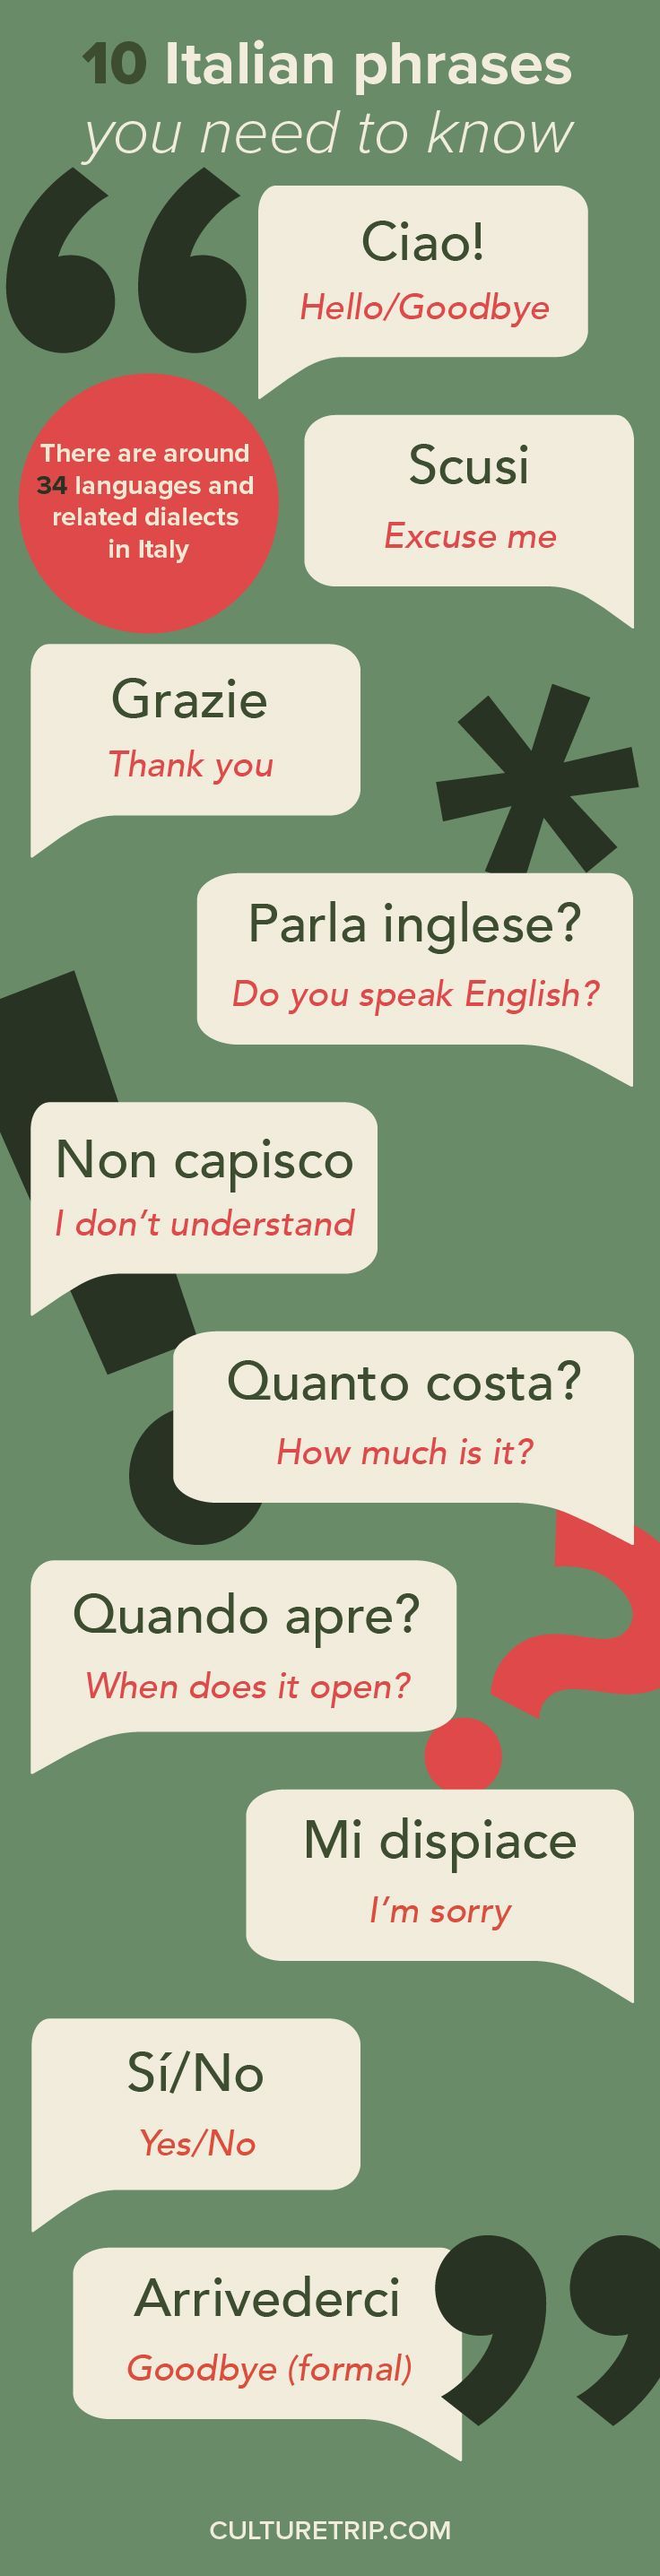 10 Useful Italian Words You Need to Know Before Traveling to Italy (Infographic)